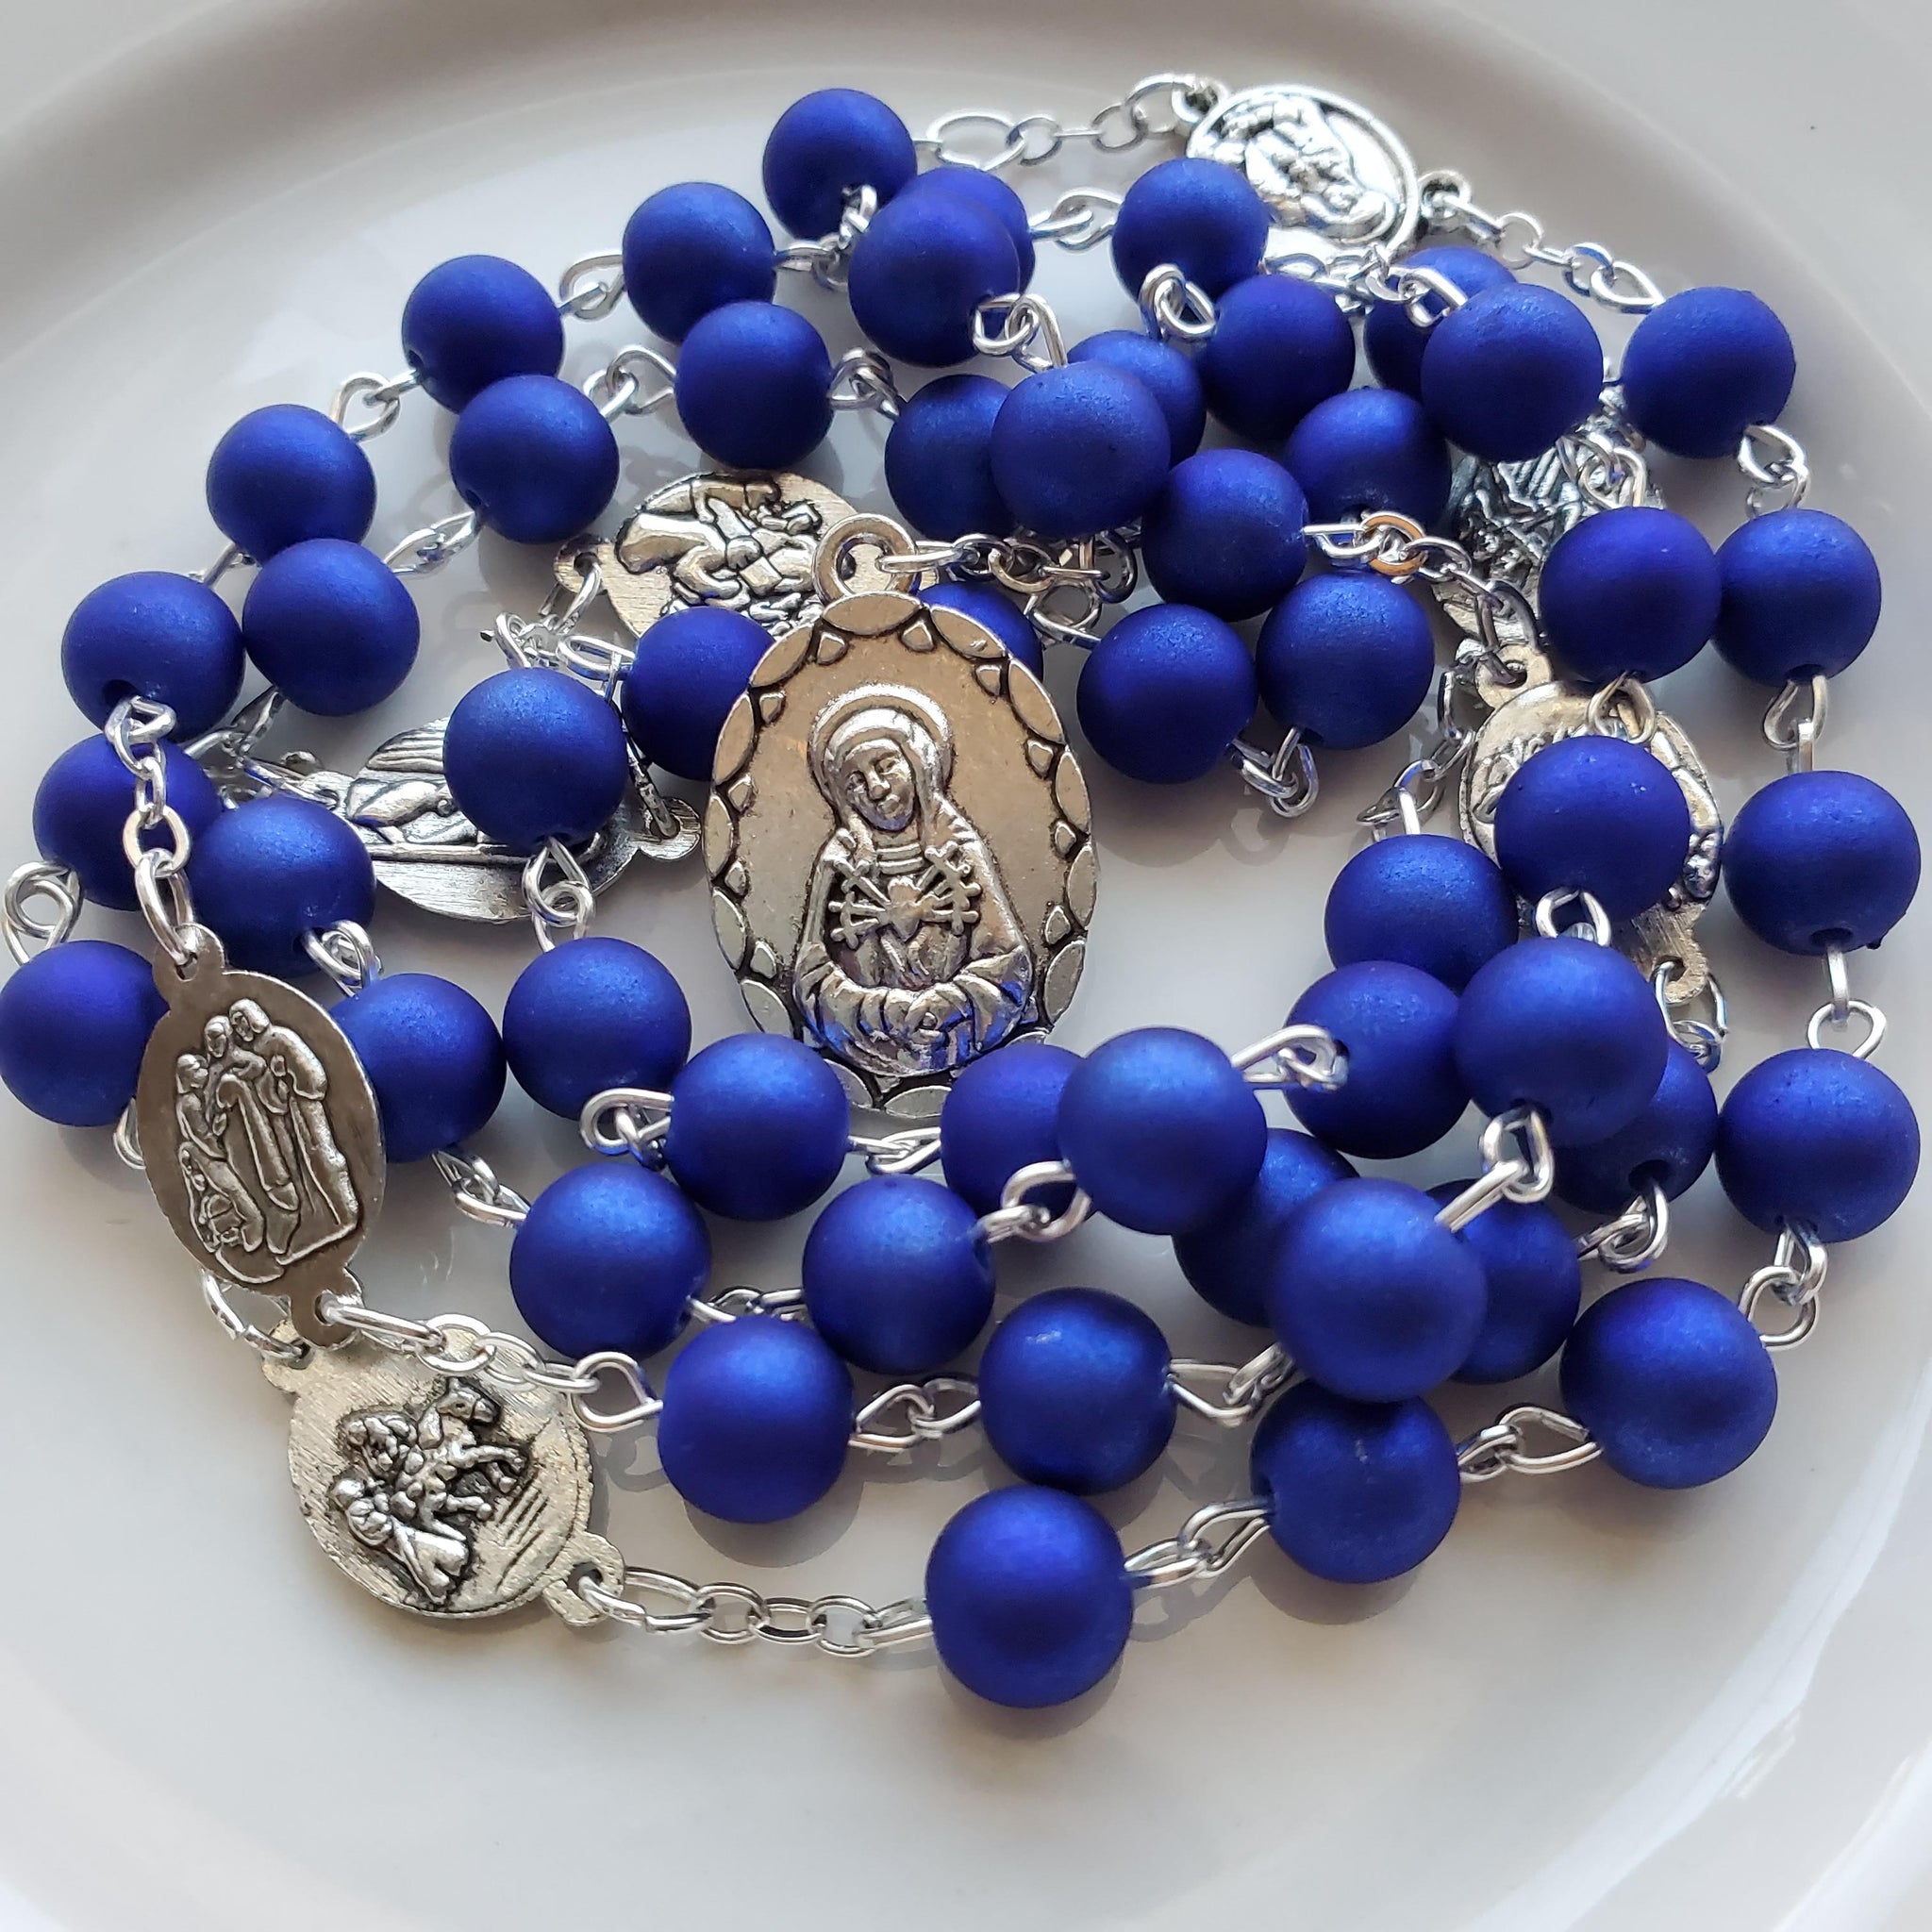 Seven Sorrows of the Blessed Virgin Mary chaplet with prayer card